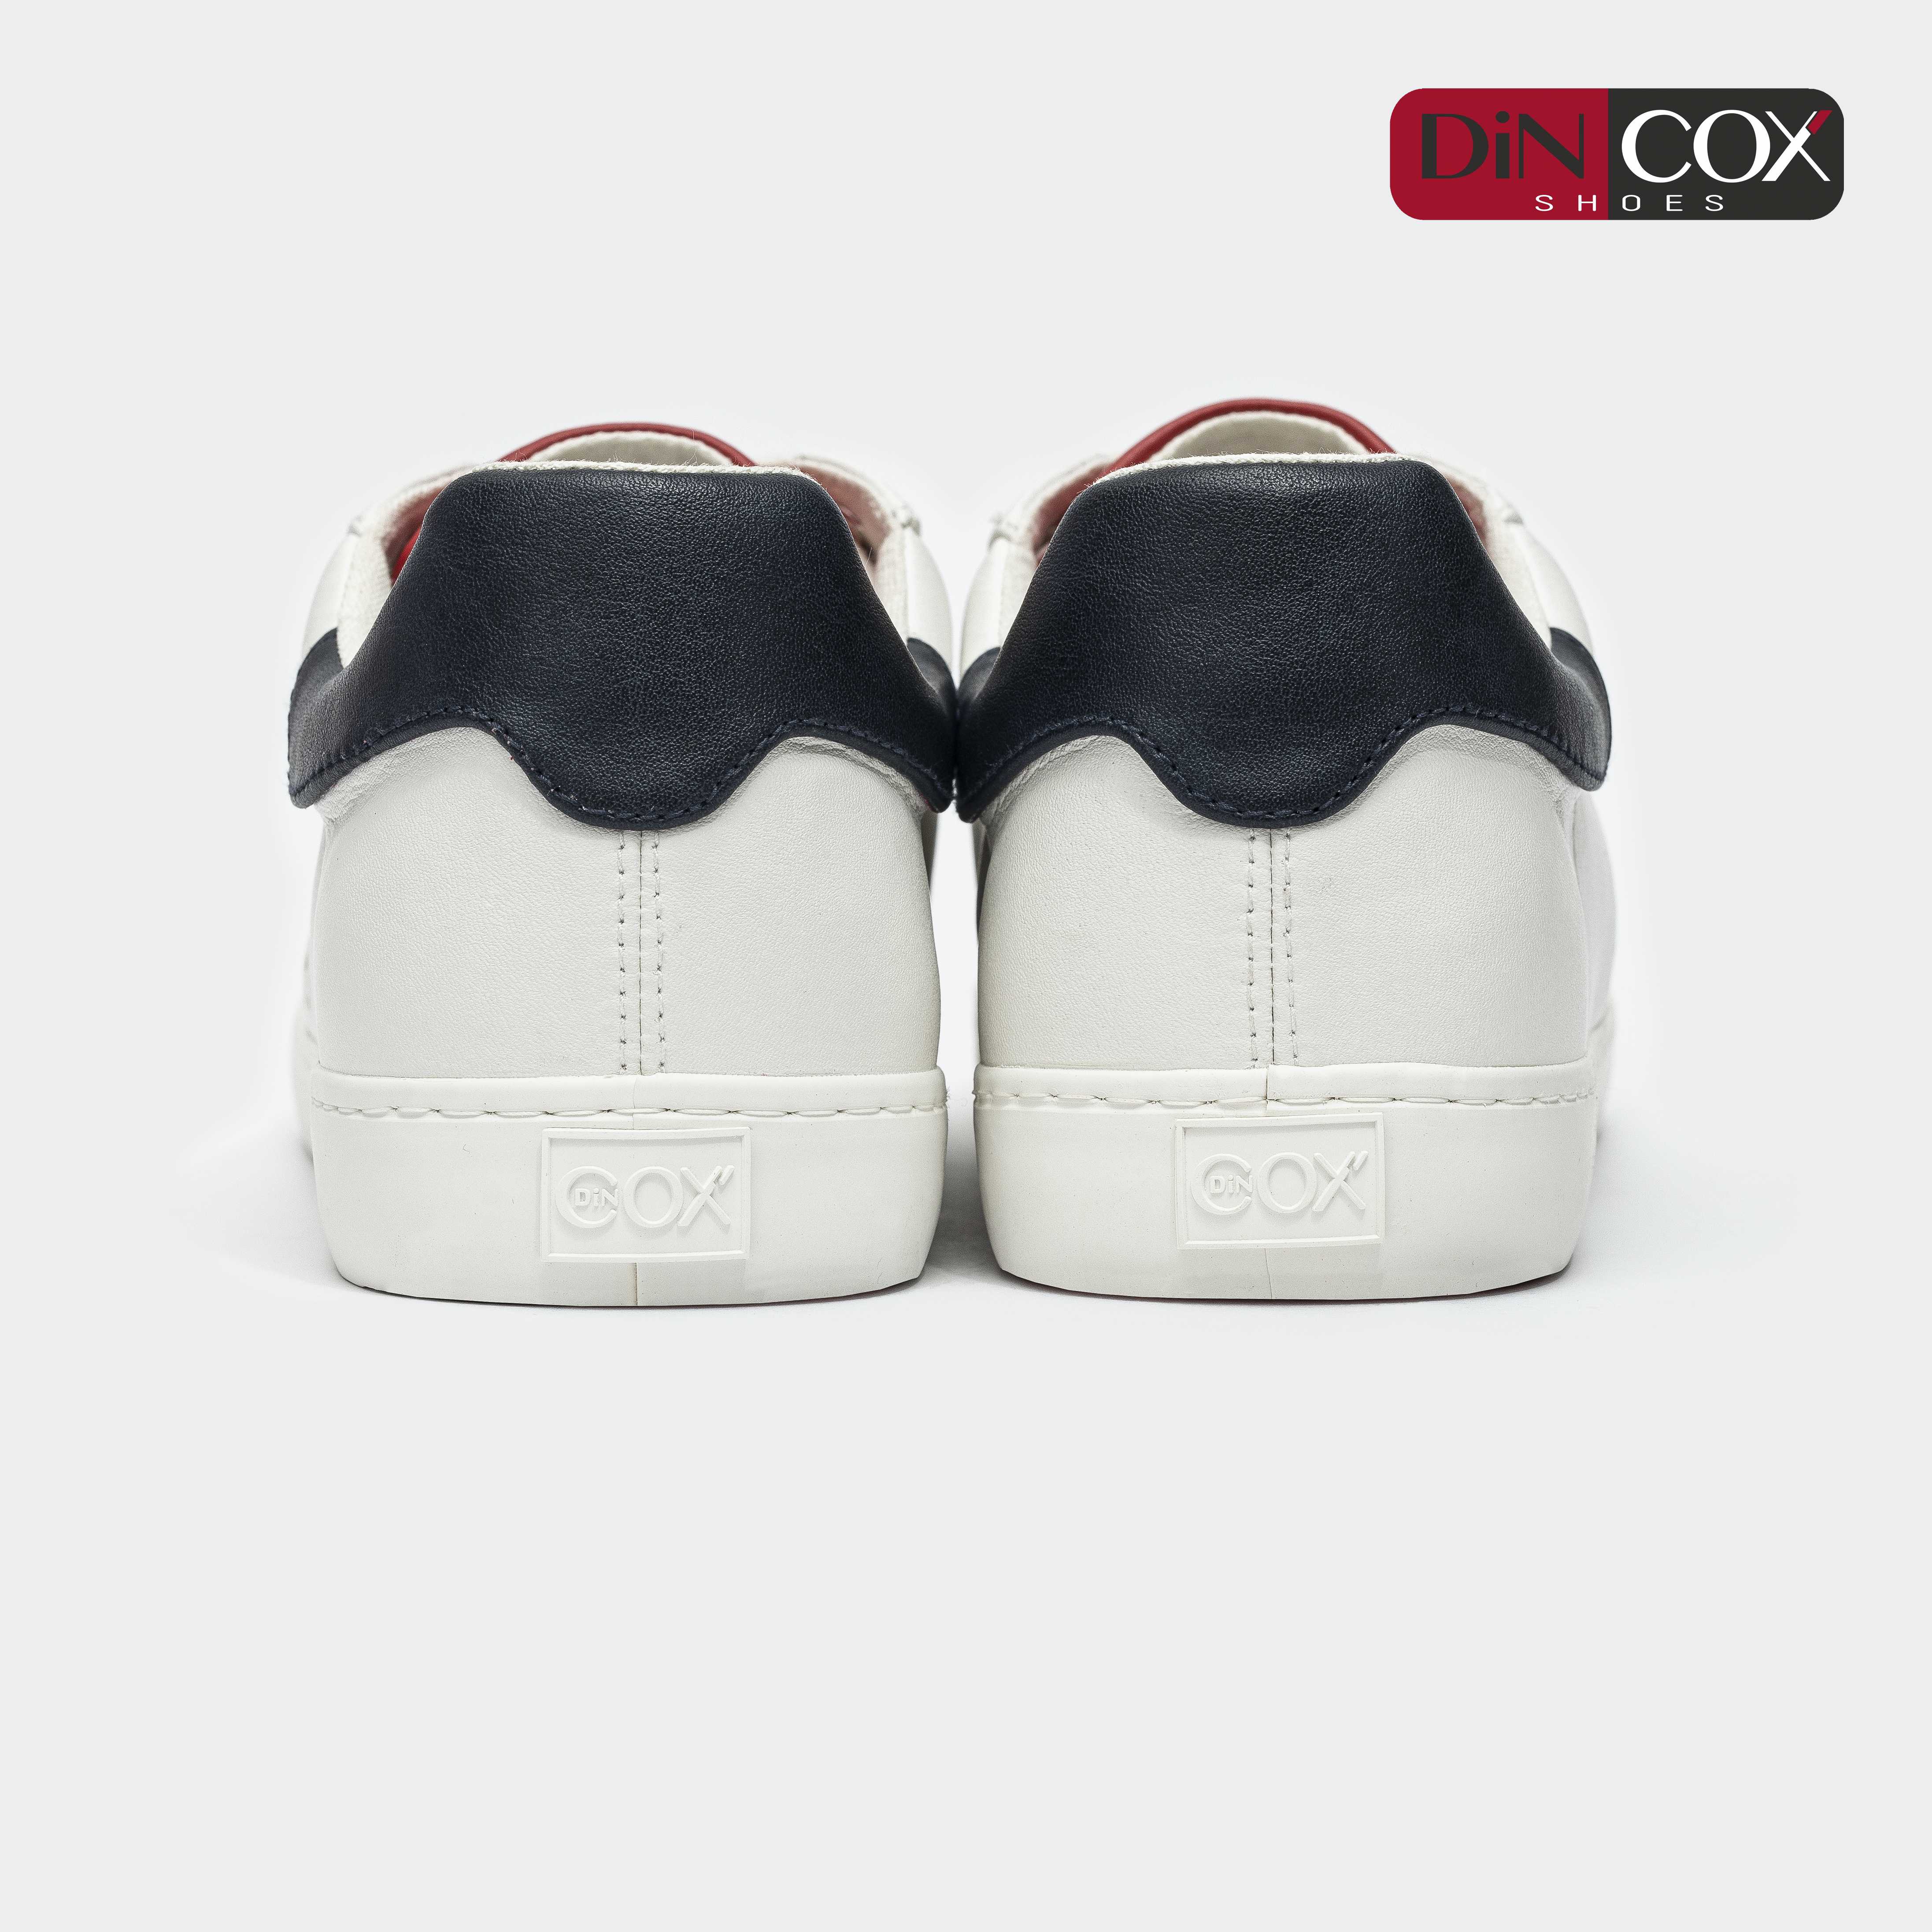 Giày Sneaker Nam C01 Offwhite/Red Dincox